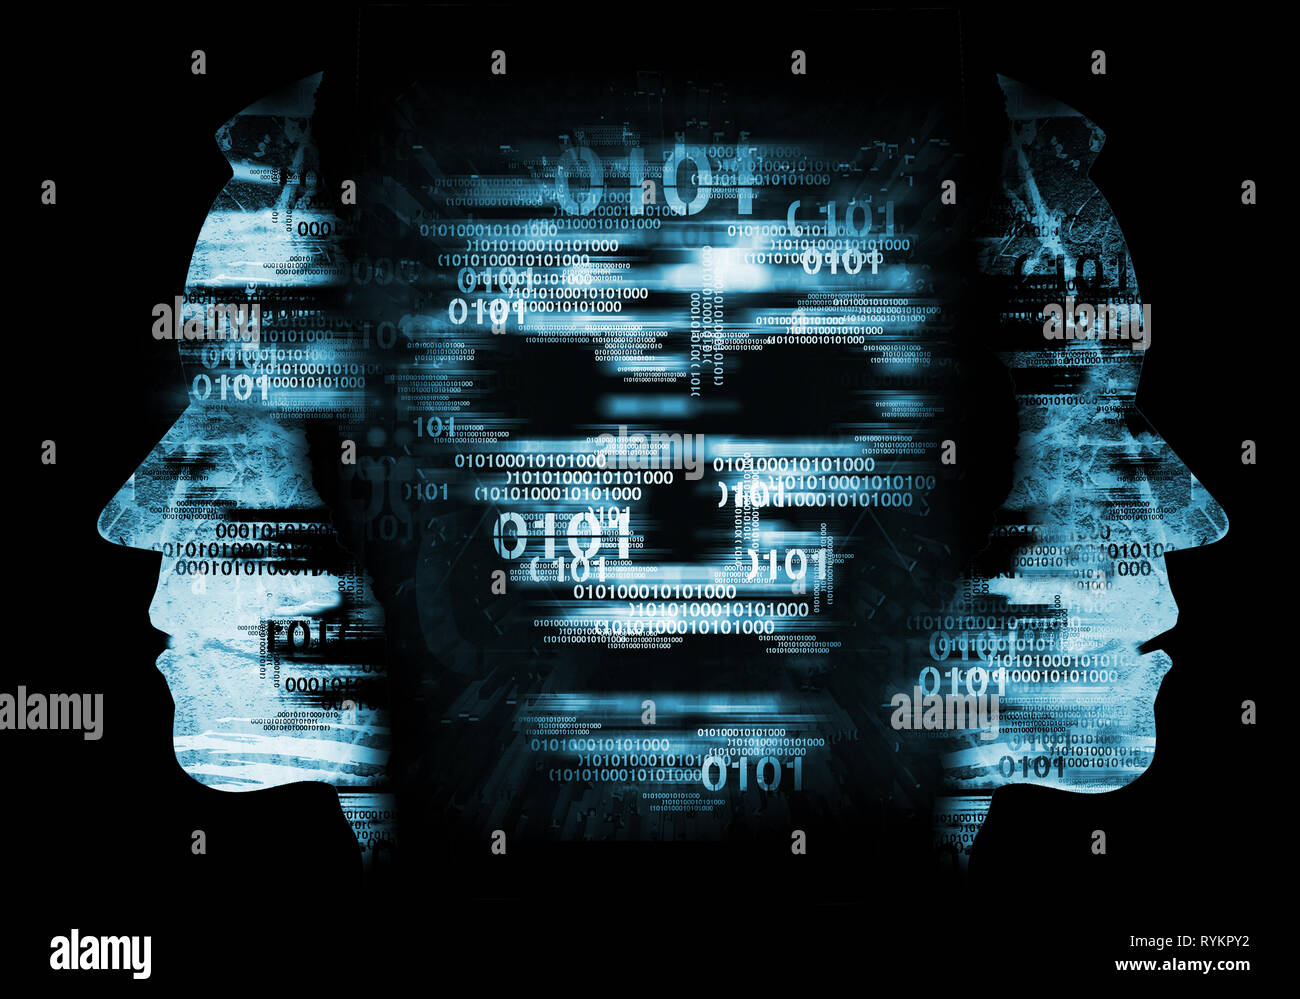 acker,Computer virus skull concept. Illustration of Abstract Skull sign with binary codes on blue background and two stylized male heads. Concept for Stock Photo